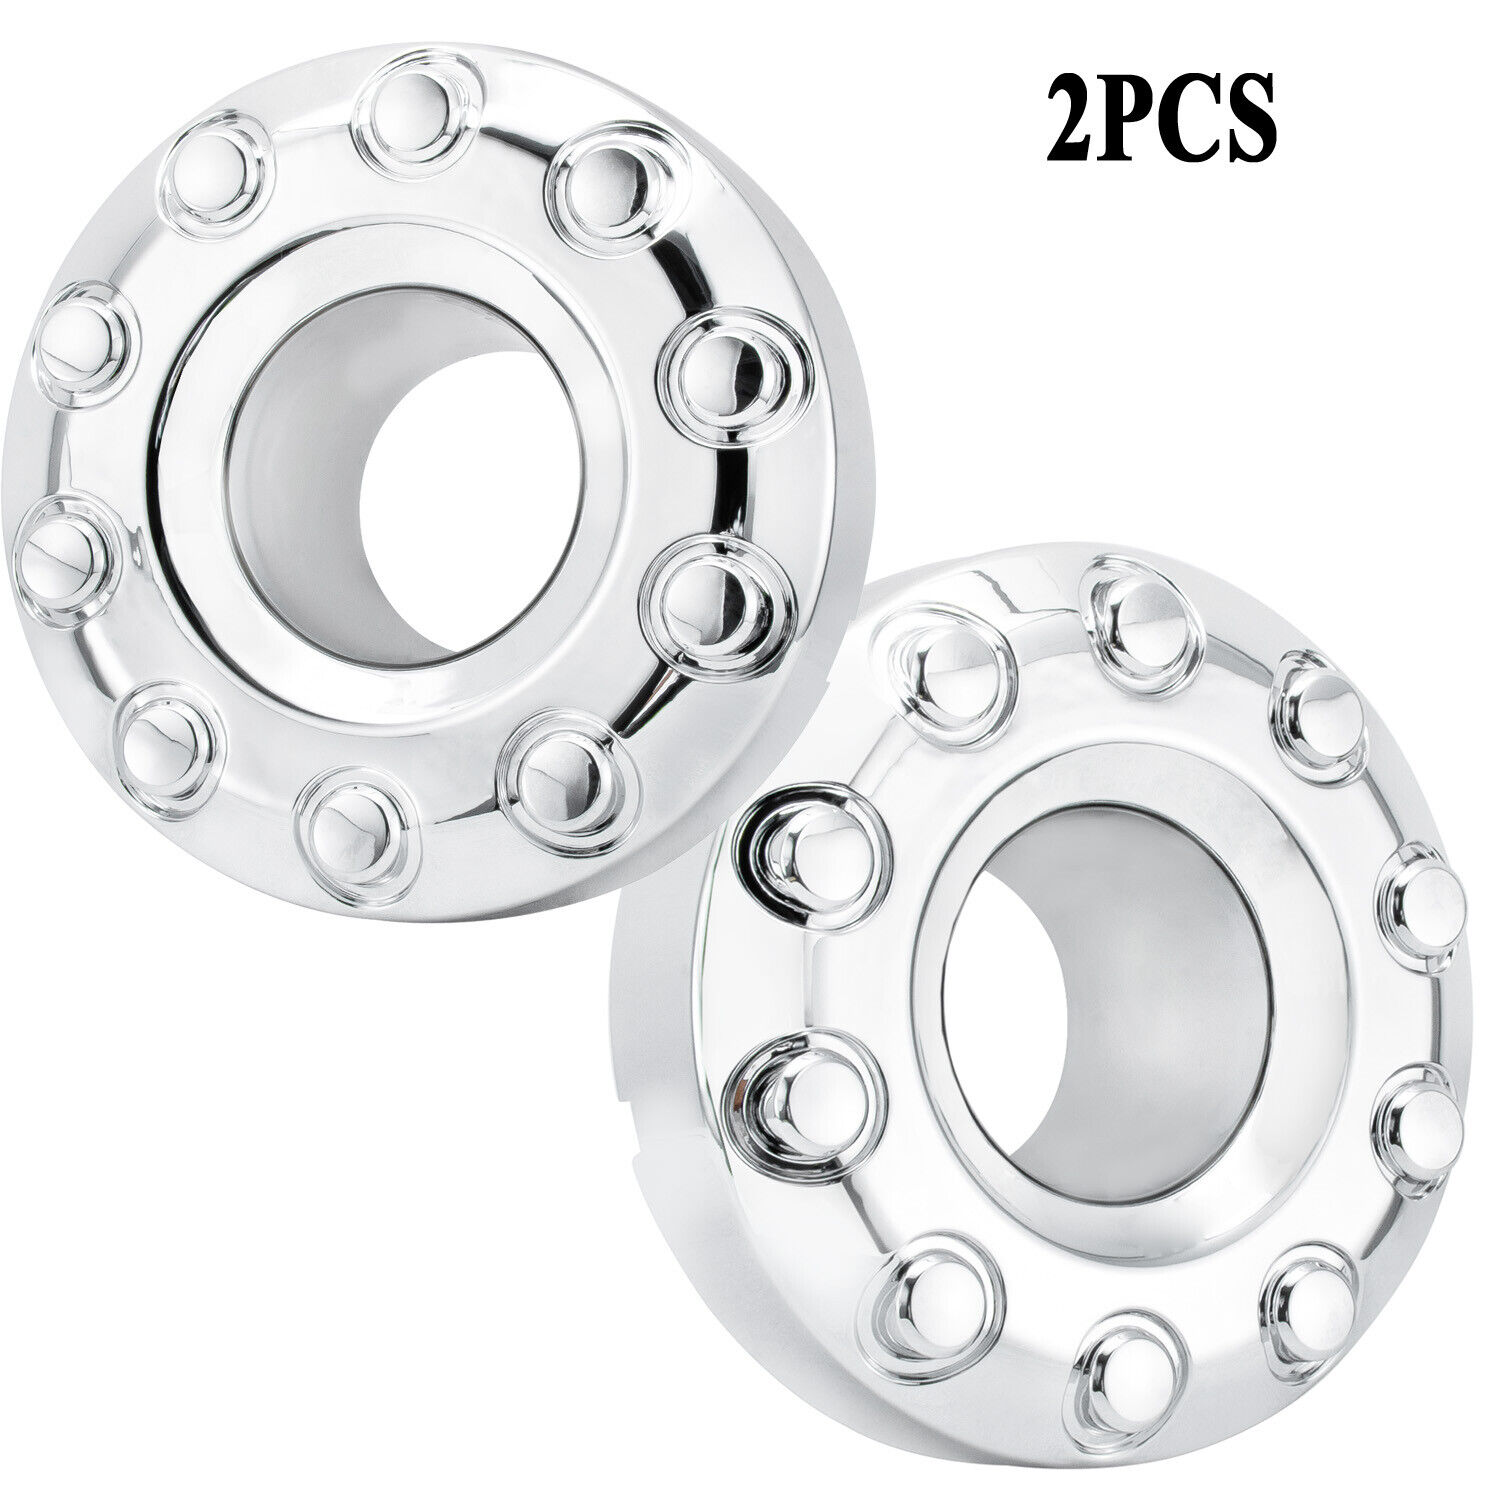 10-Lug Front Car Wheel Hub Center Caps Fit For Ford F450 F550 2005-17 Super Duty